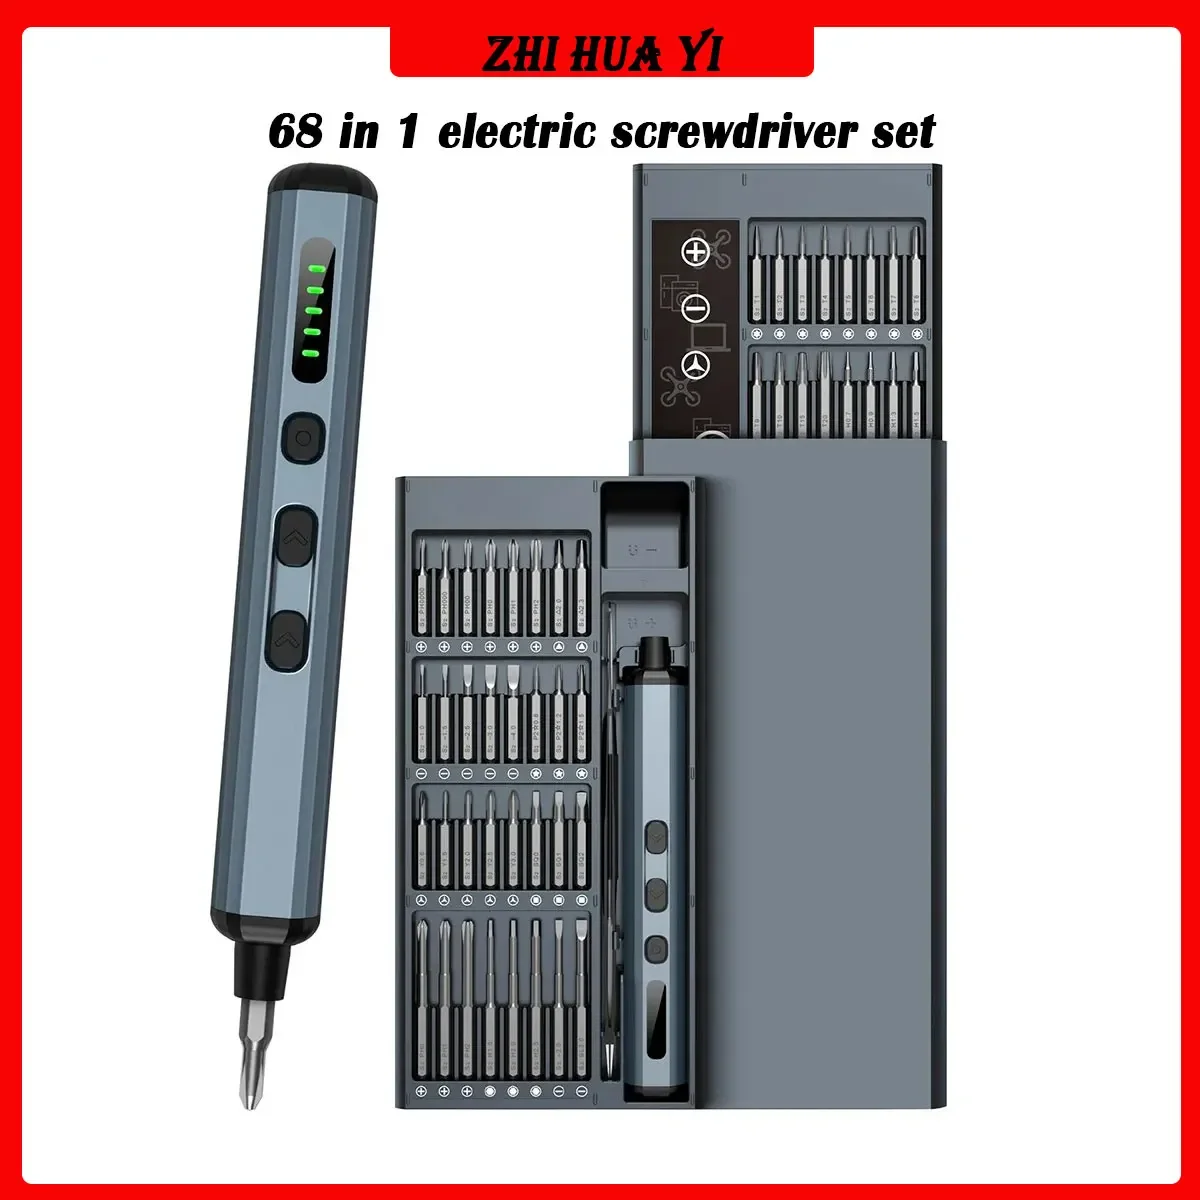 

68 in 1 Electric Screwdriver Set 5 Torque Settings Precision Power Tool Magnetic Screw Driver Bits for iPhone Glasses Watch PC